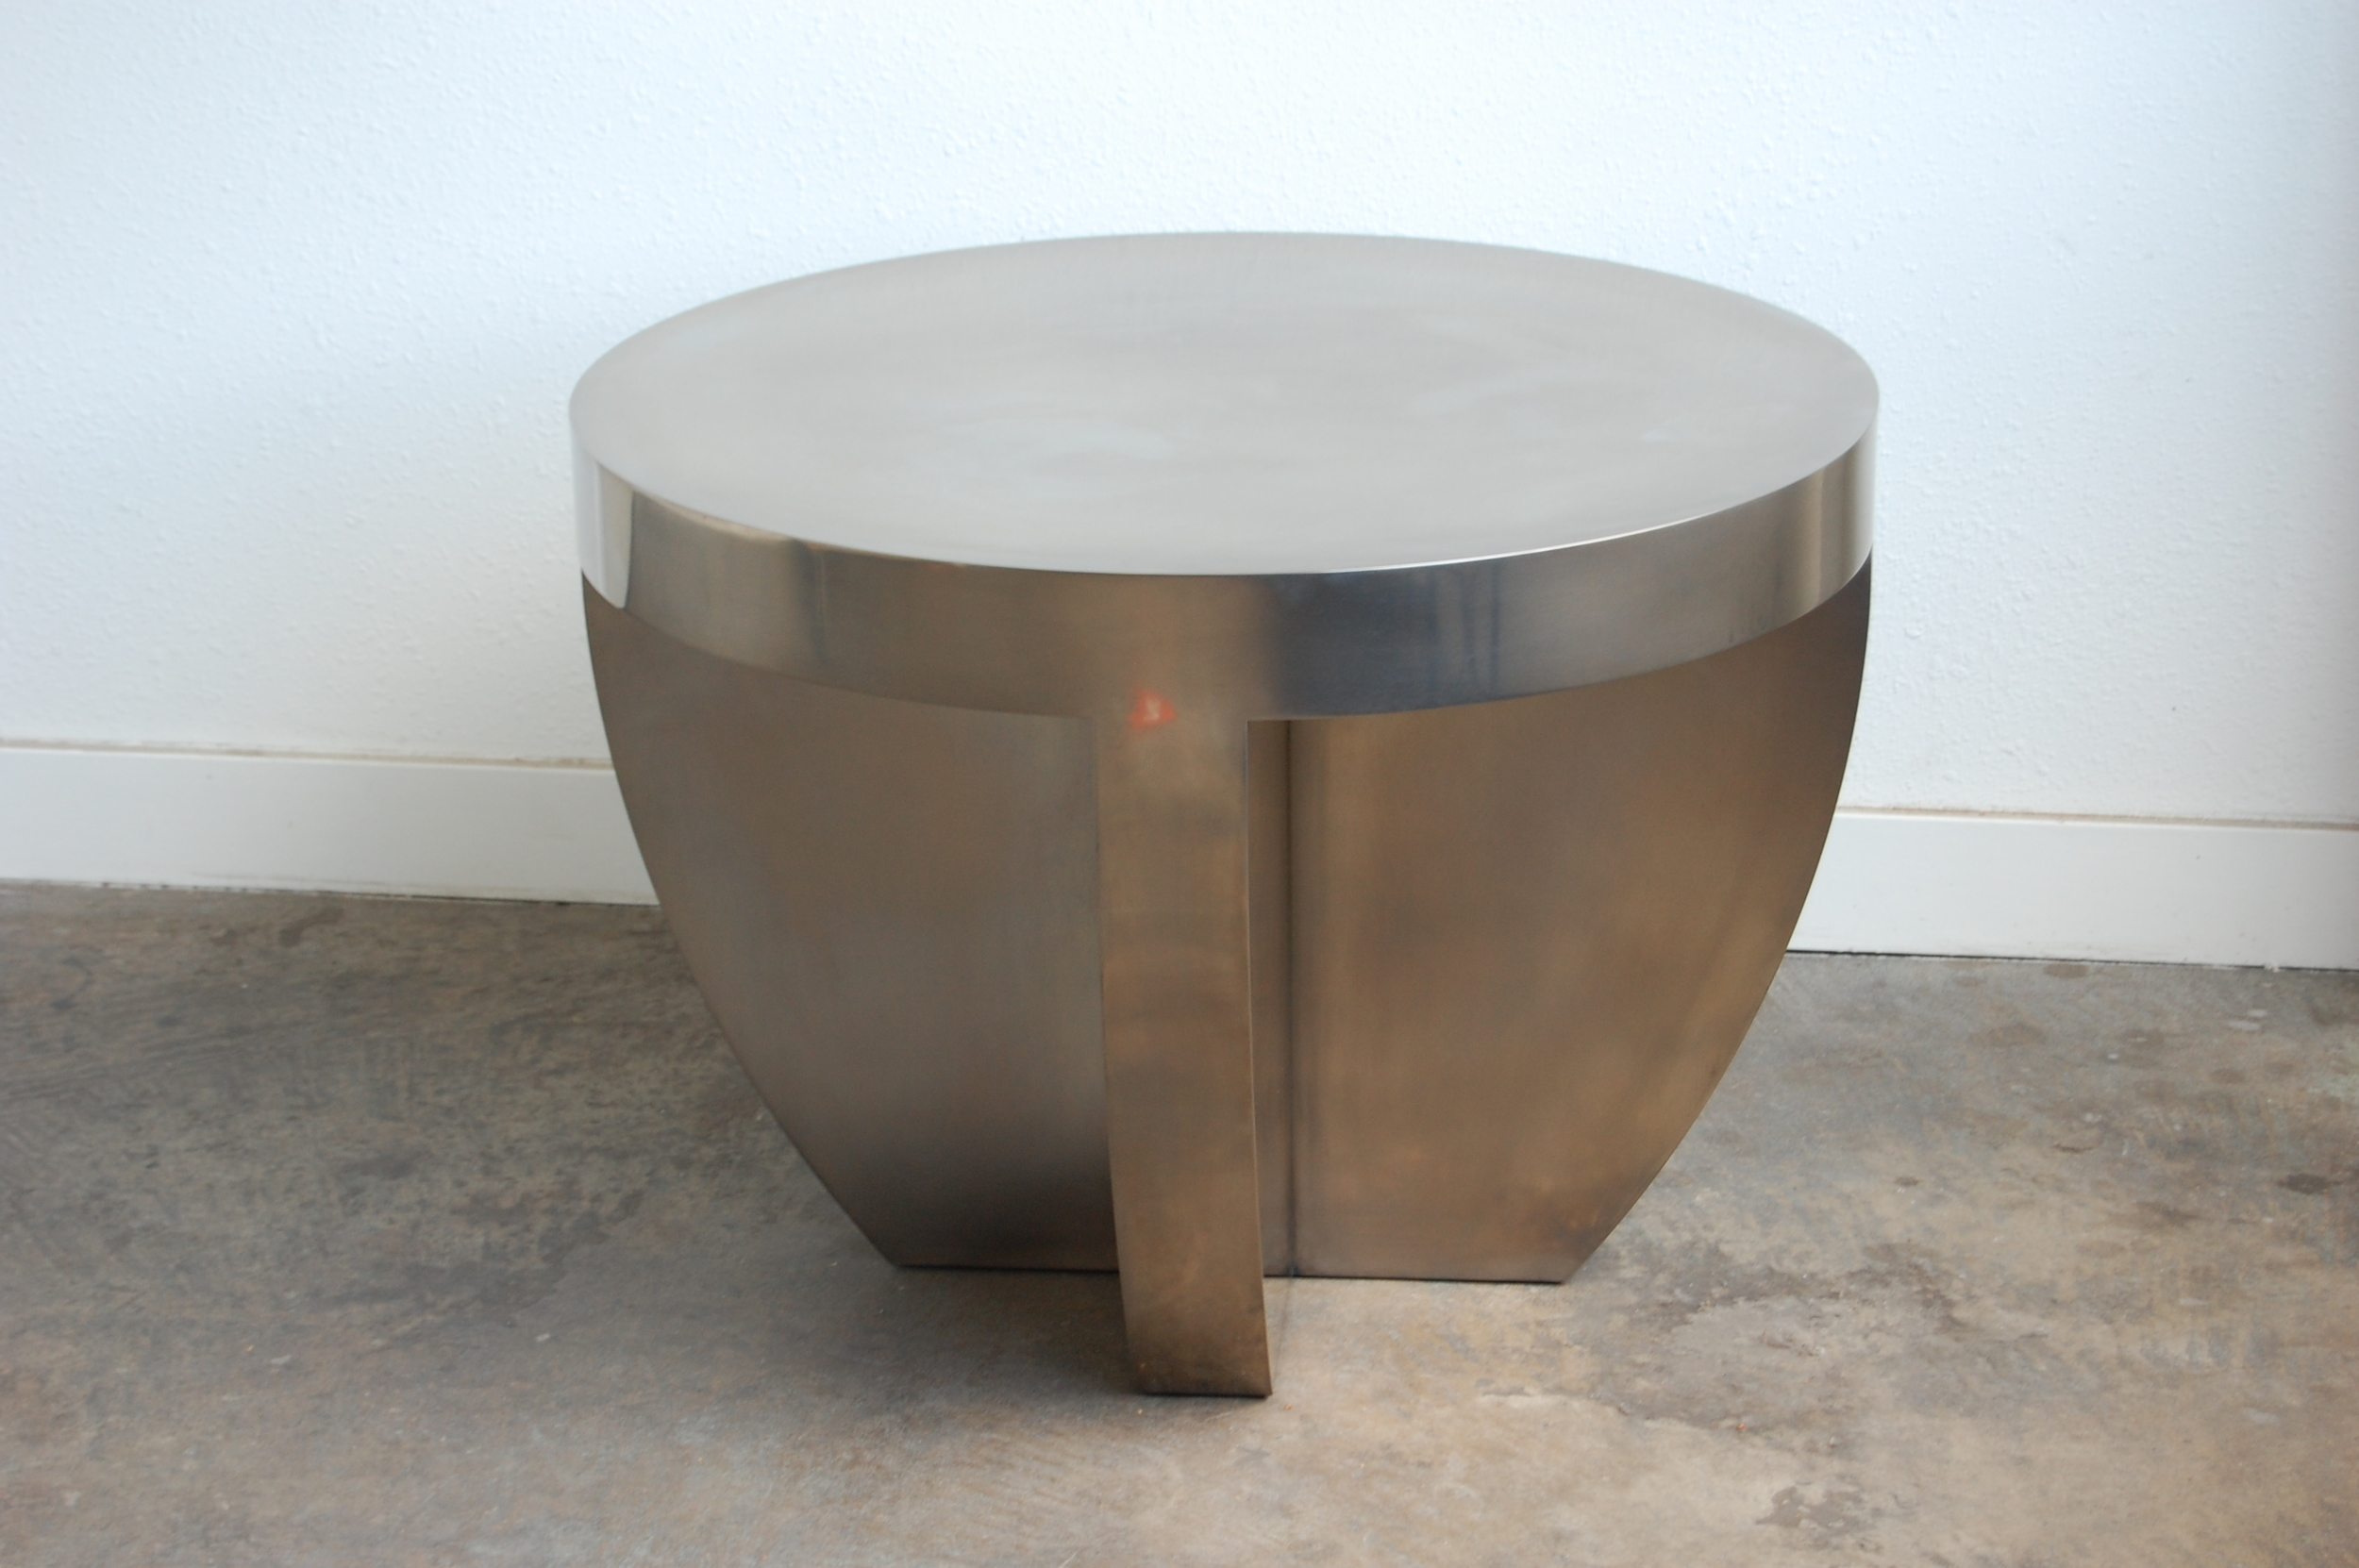  Nickel Plated Side Table.  Designed by Group Jake Collaborative 